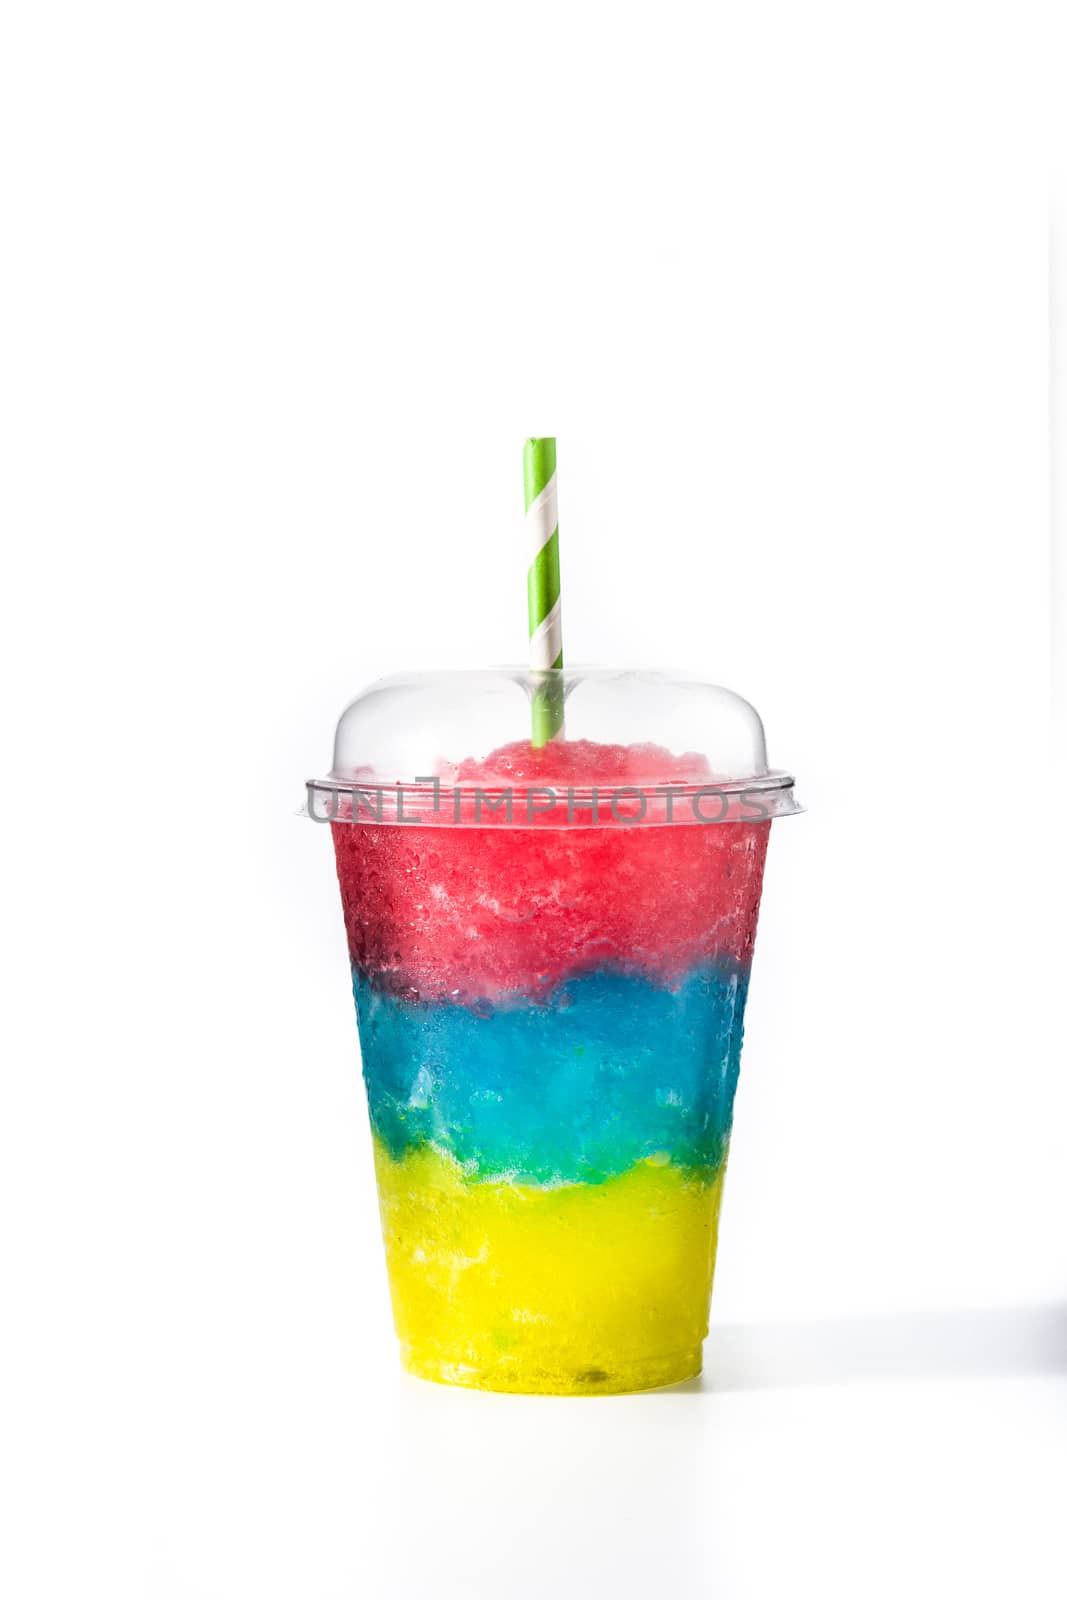 Colorful slushie with straw in plastic cup by chandlervid85